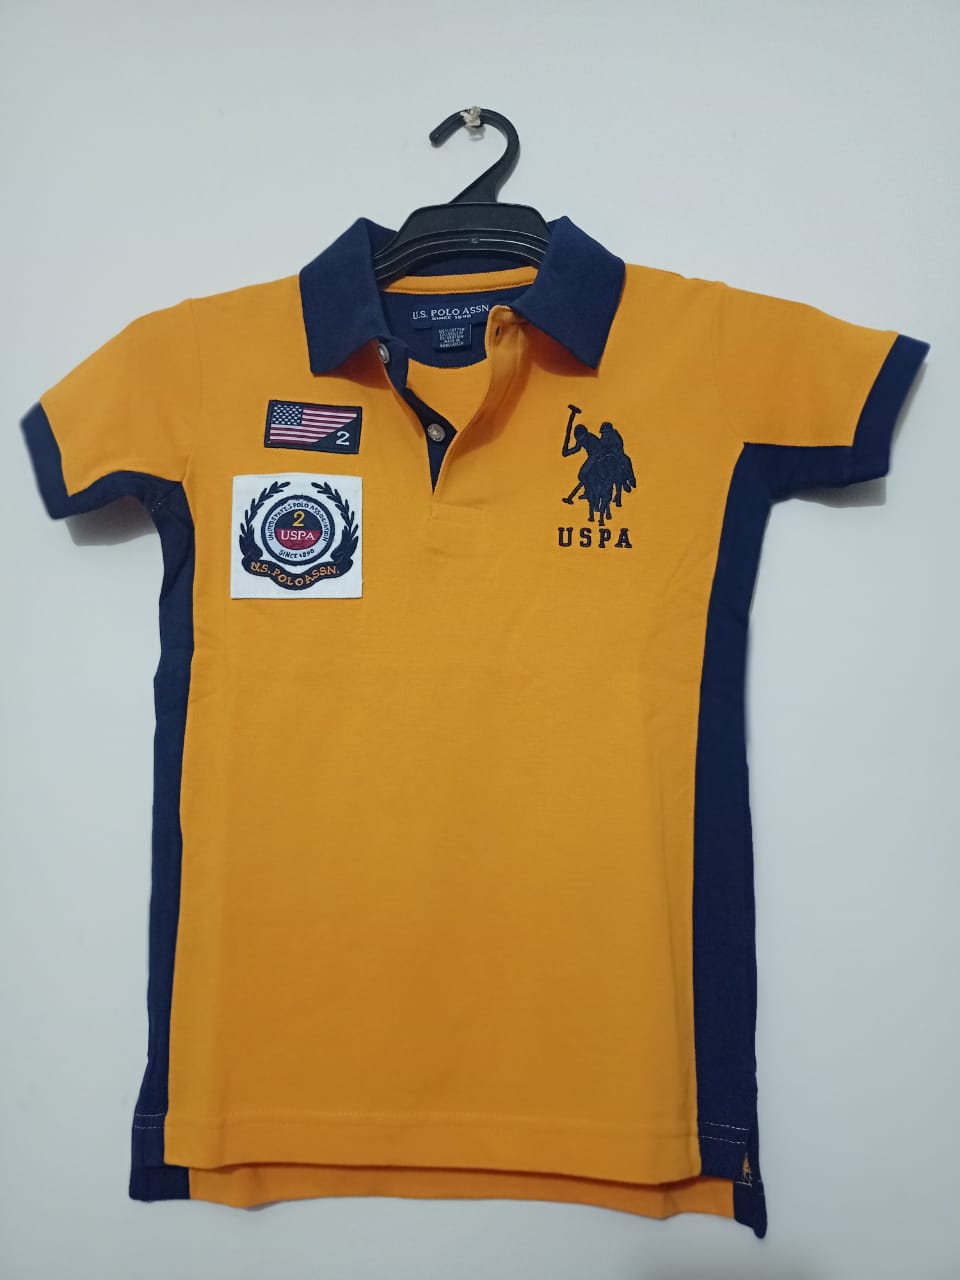 Meerab Industries on Twitter: "US Polo Assn Polo Shirt Manufacturers In  Bangladesh Garments Factory Stock Lot Wholesale US Polo Assn Polo Shirt  Manufacturers In Bangladesh Garments Factory Stock Lot Wholesale Exporter  Garments